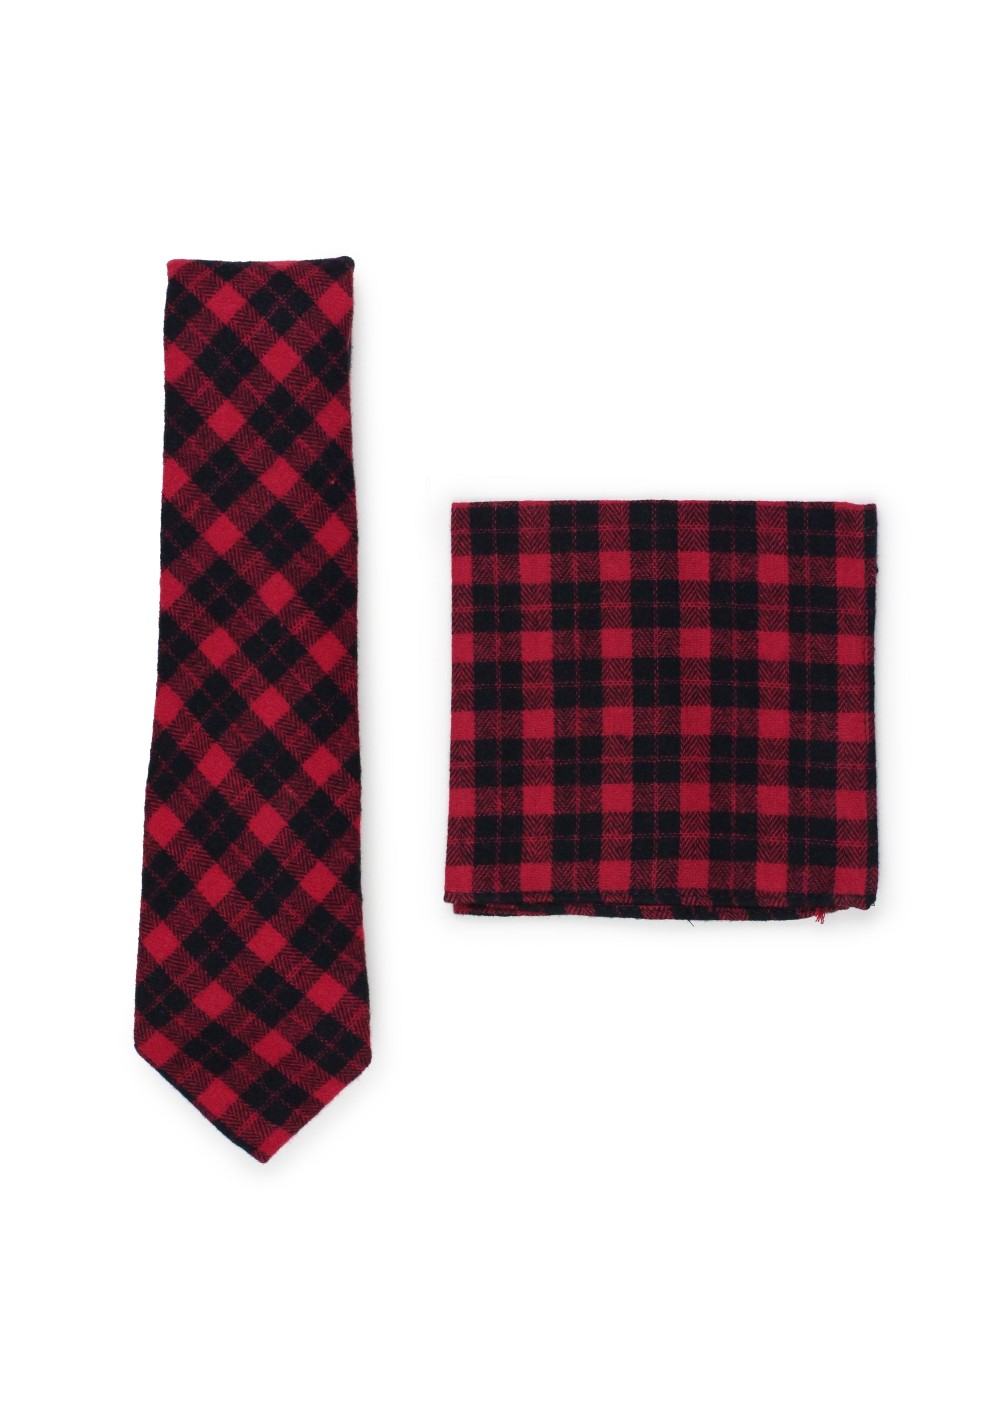 Tartan plaid necktie with hanky in crimson red and black